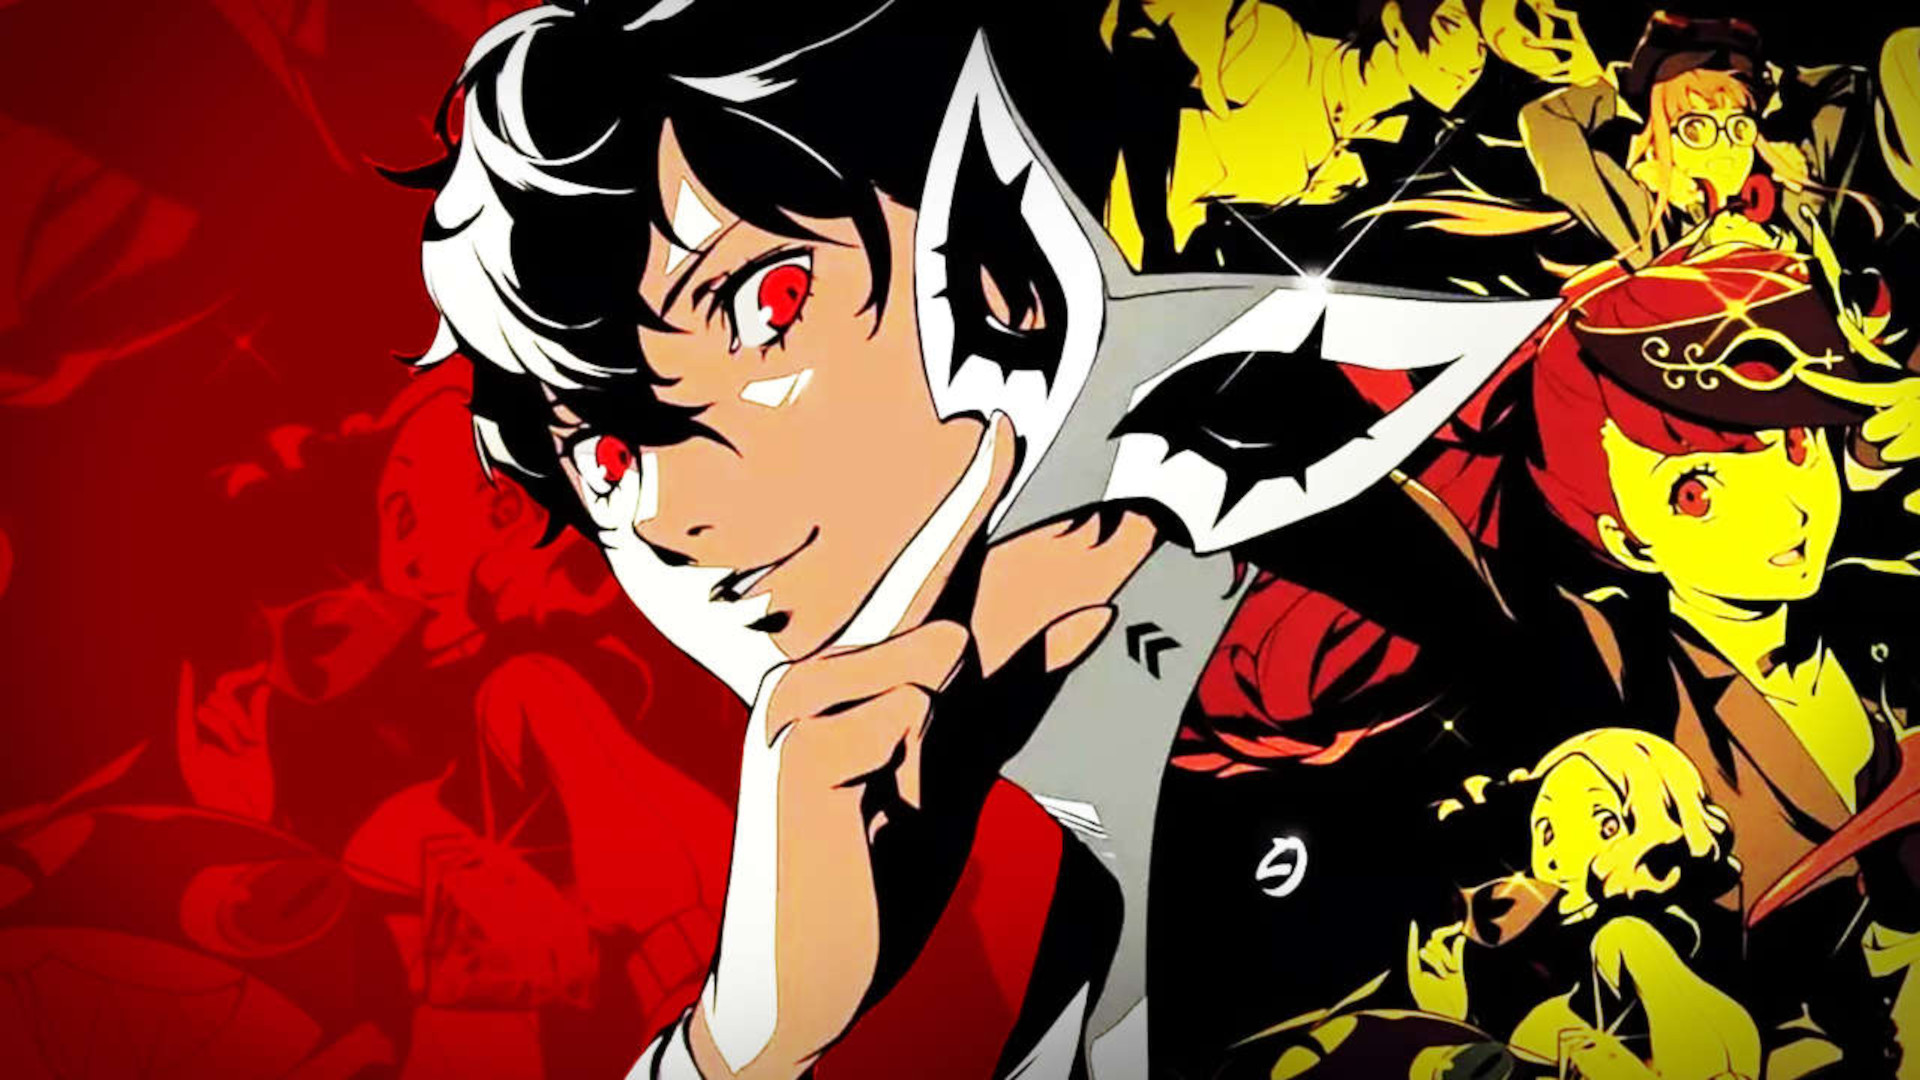 Persona 5 Characters All Playable Phantom Thieves